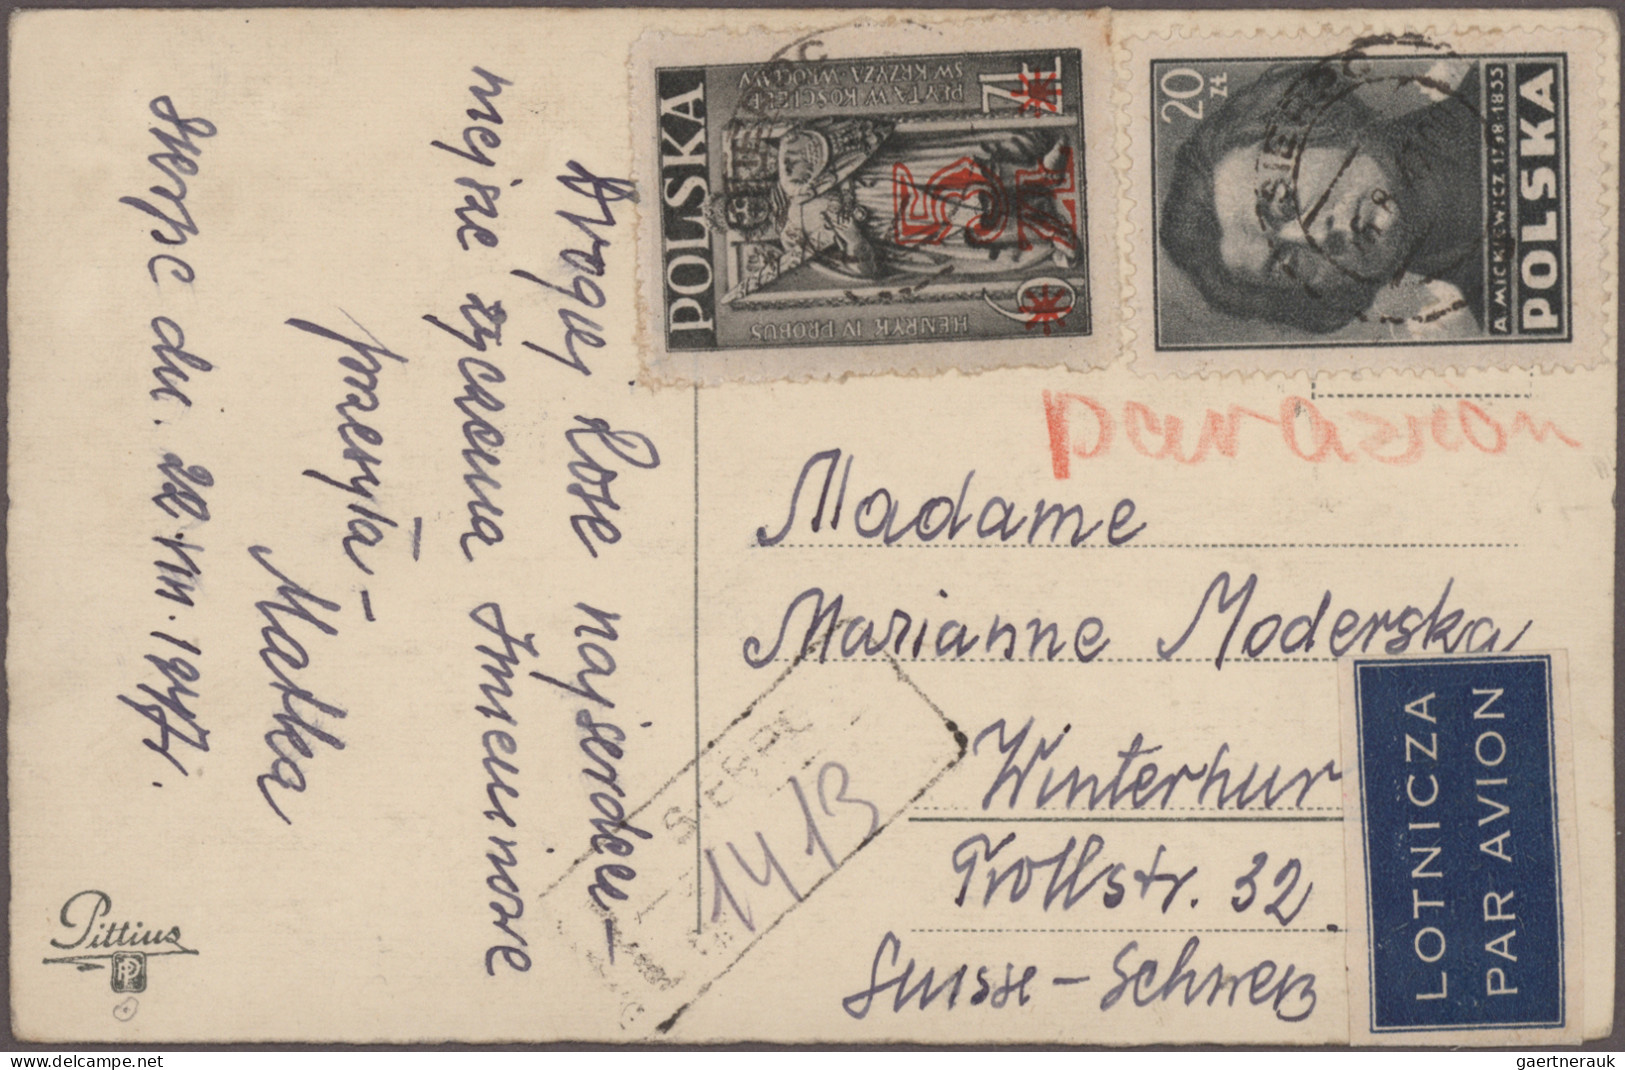 Poland: 1946/1952, lot of 15 covers/cards incl. registered and airmail, commerci